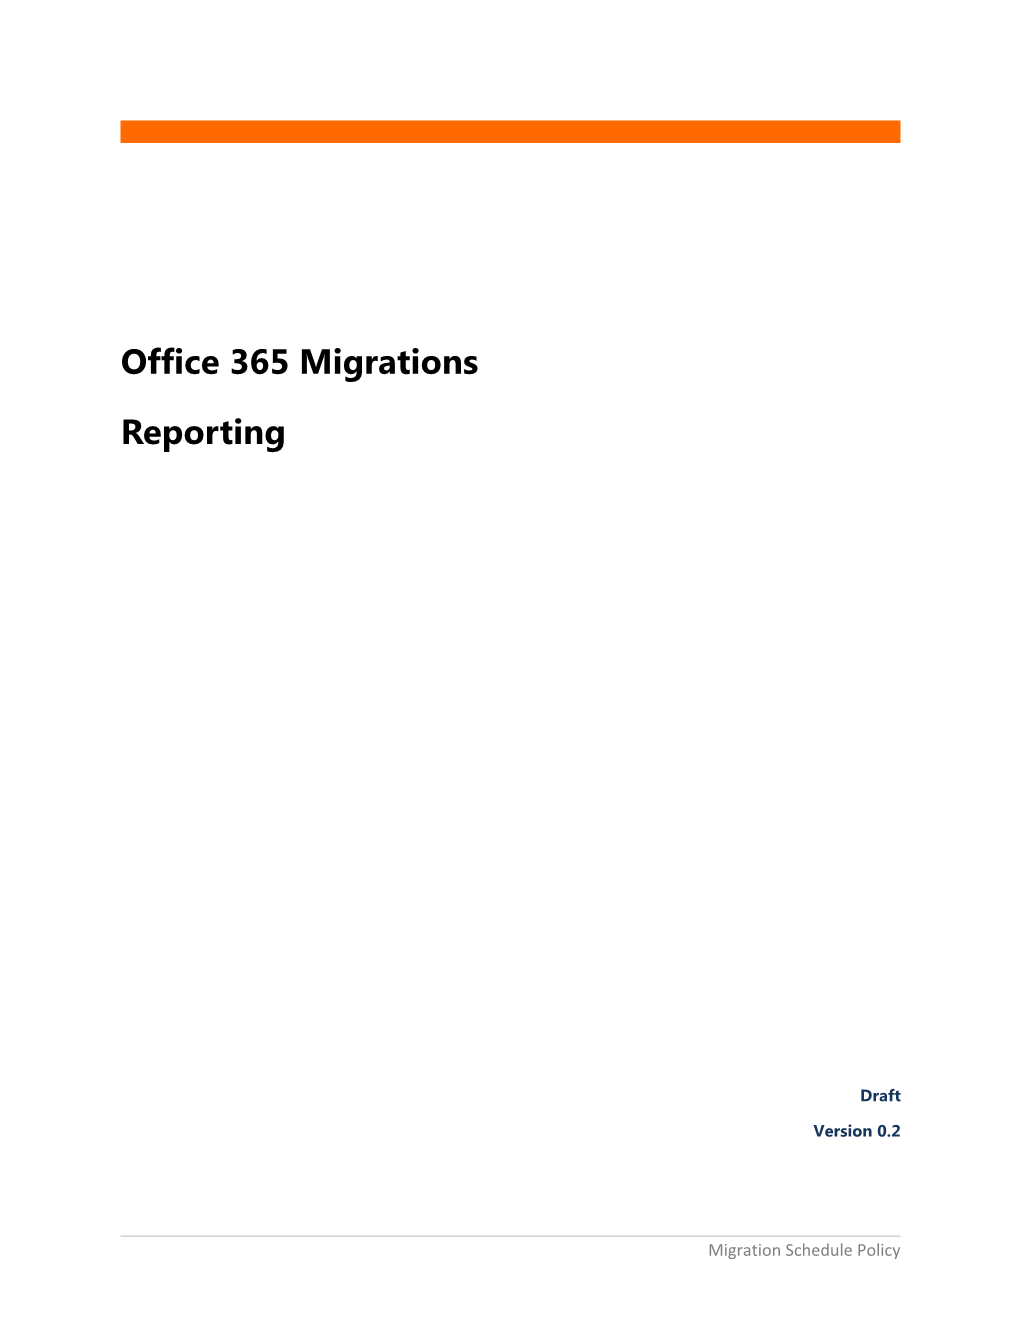 1. Migration Reporting Pre & Post Migration 2